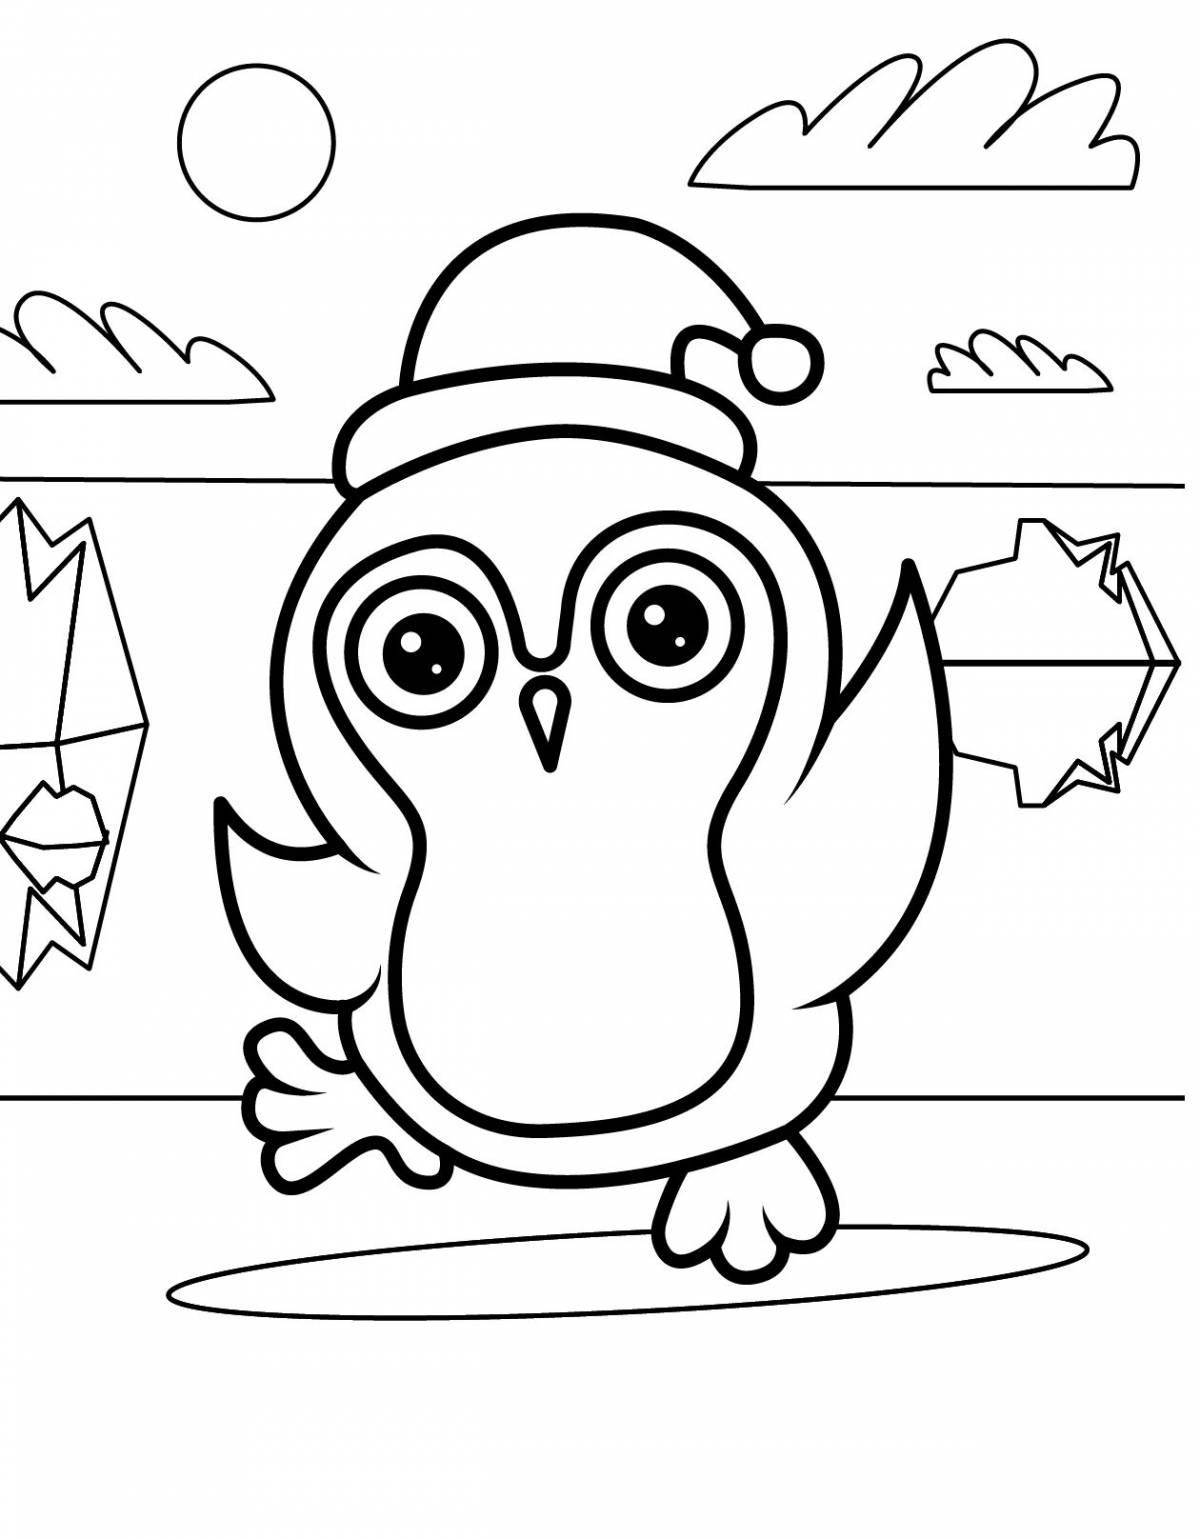 Penguin glamorous coloring pages